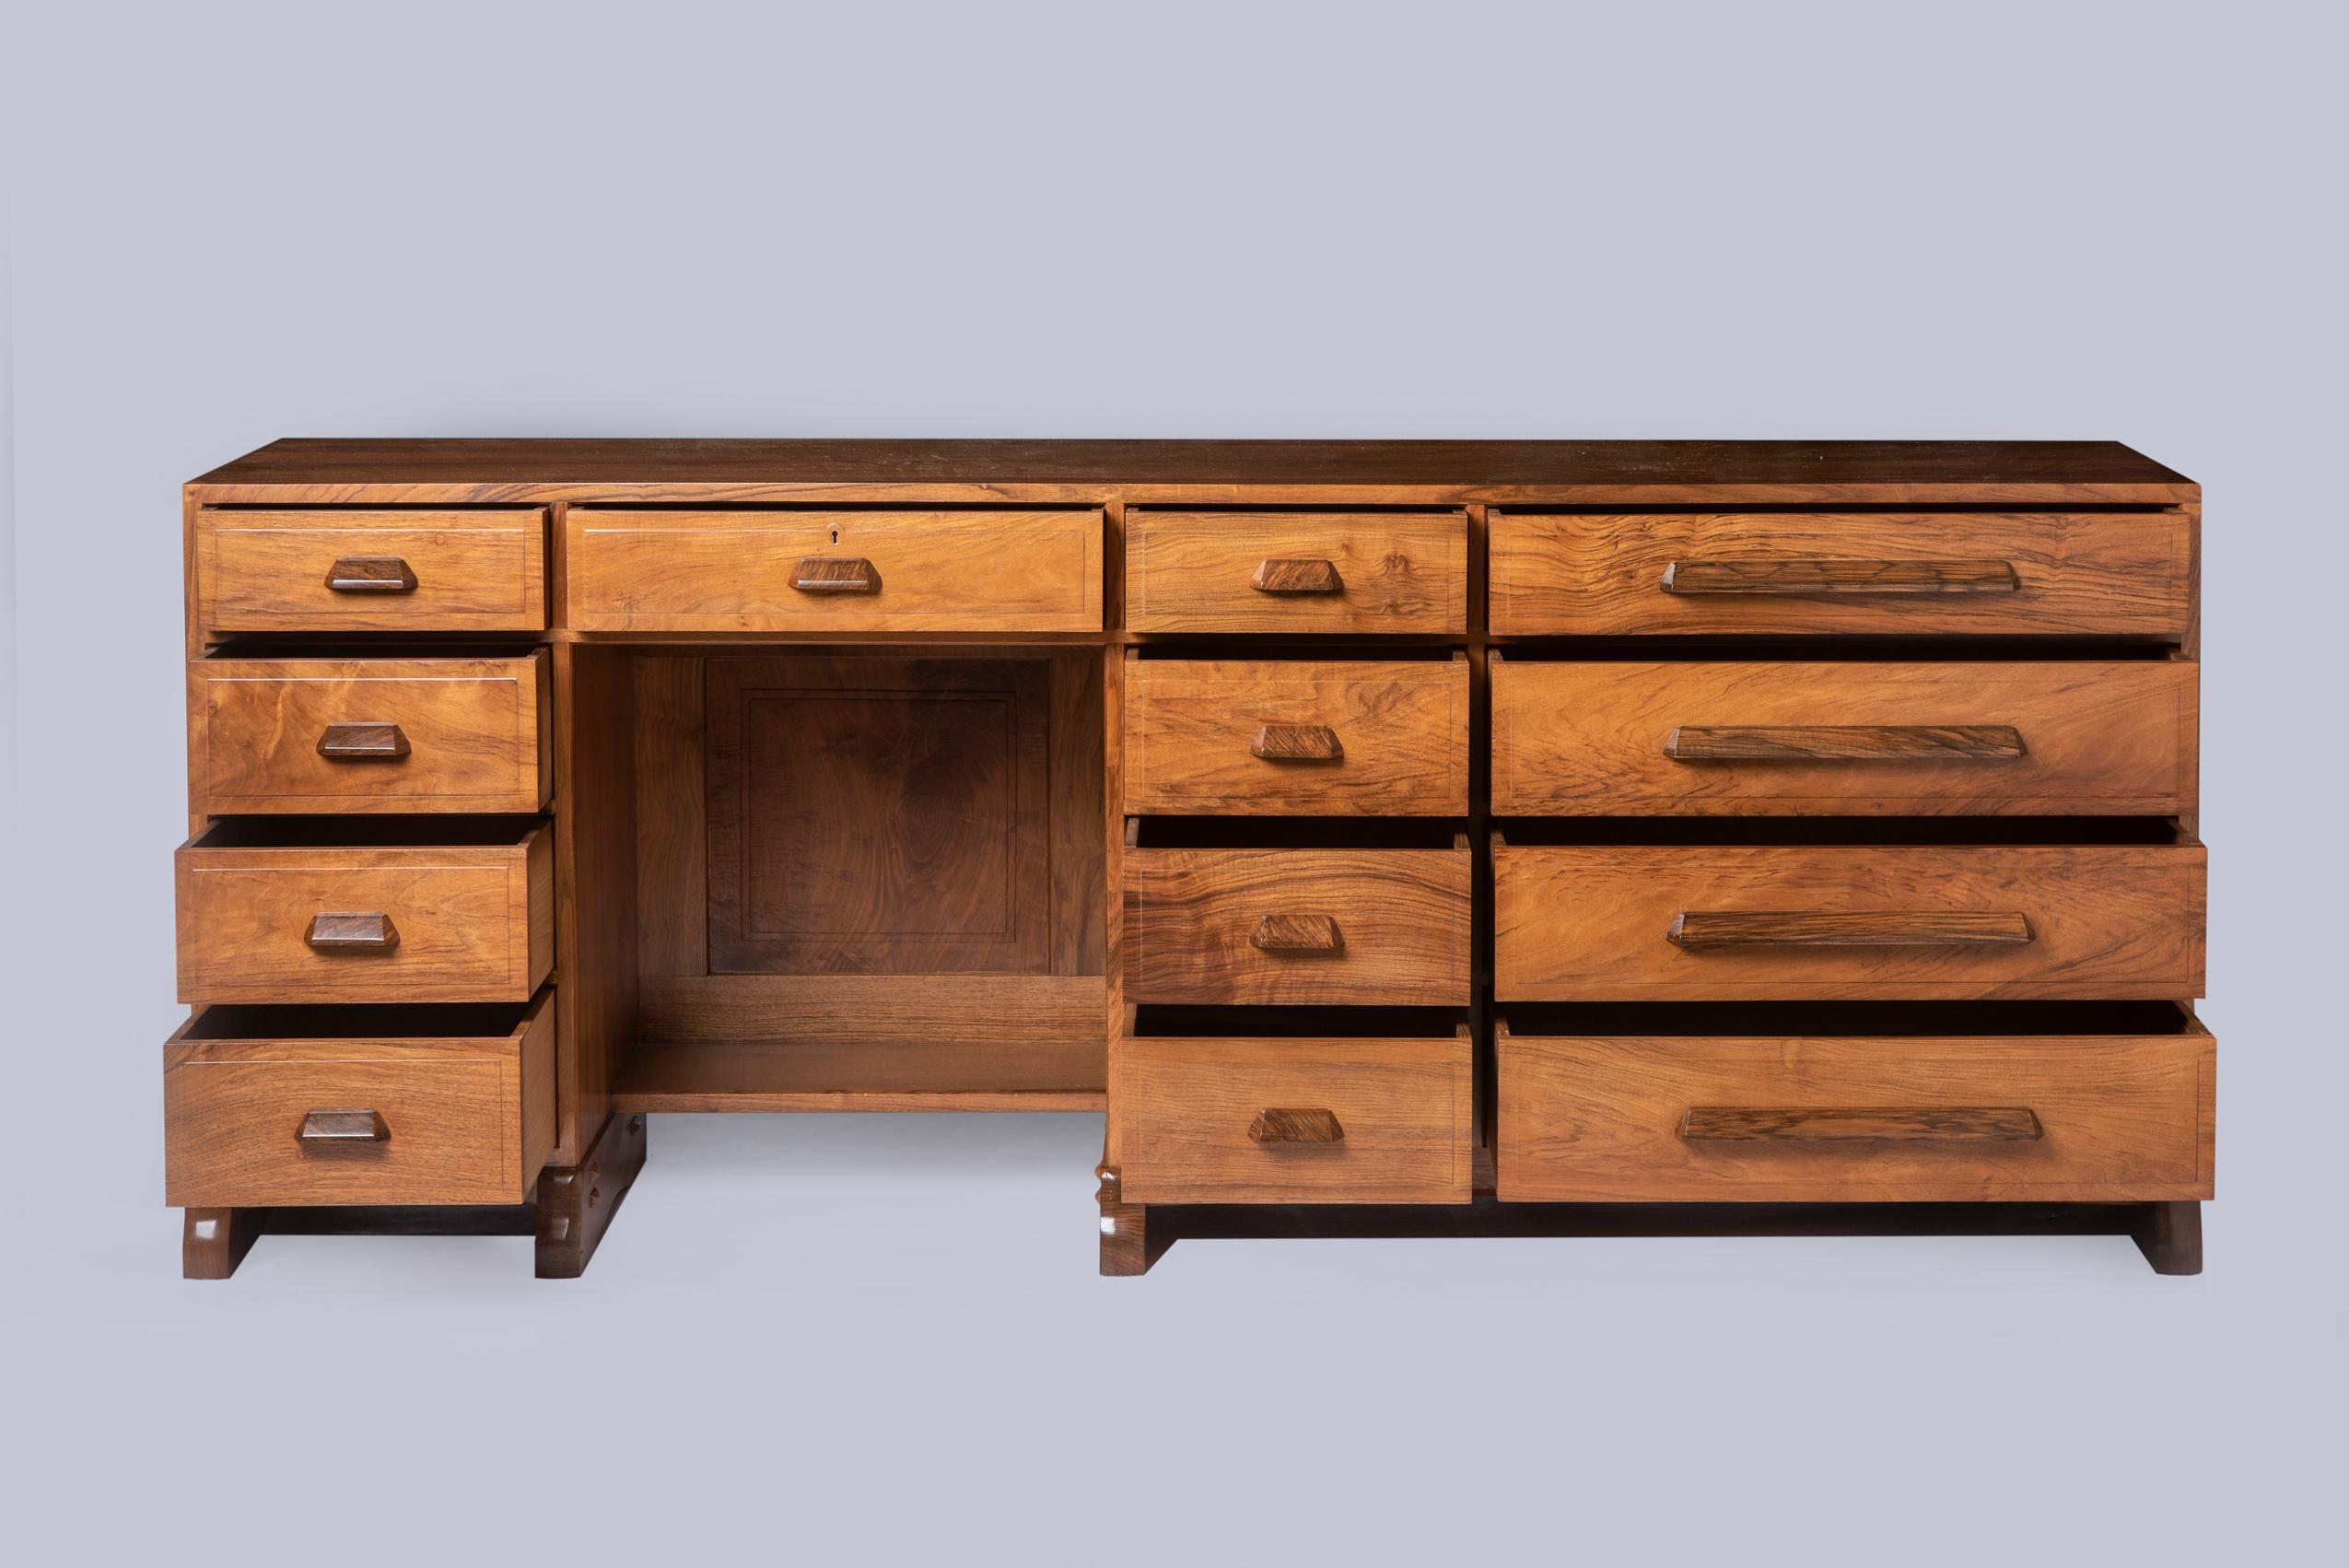 A beautifully made walnut kneehole desk by Peter Waals (1870-1937)
Fitted with 9 short drawers and 5 long, on shaped chamfered feet.
England, circa 1935
Measures: 75.5 cm high x 192.5 cm wide x 53 cm deep

Prov; Mrs Crowther (nee Goddard) and